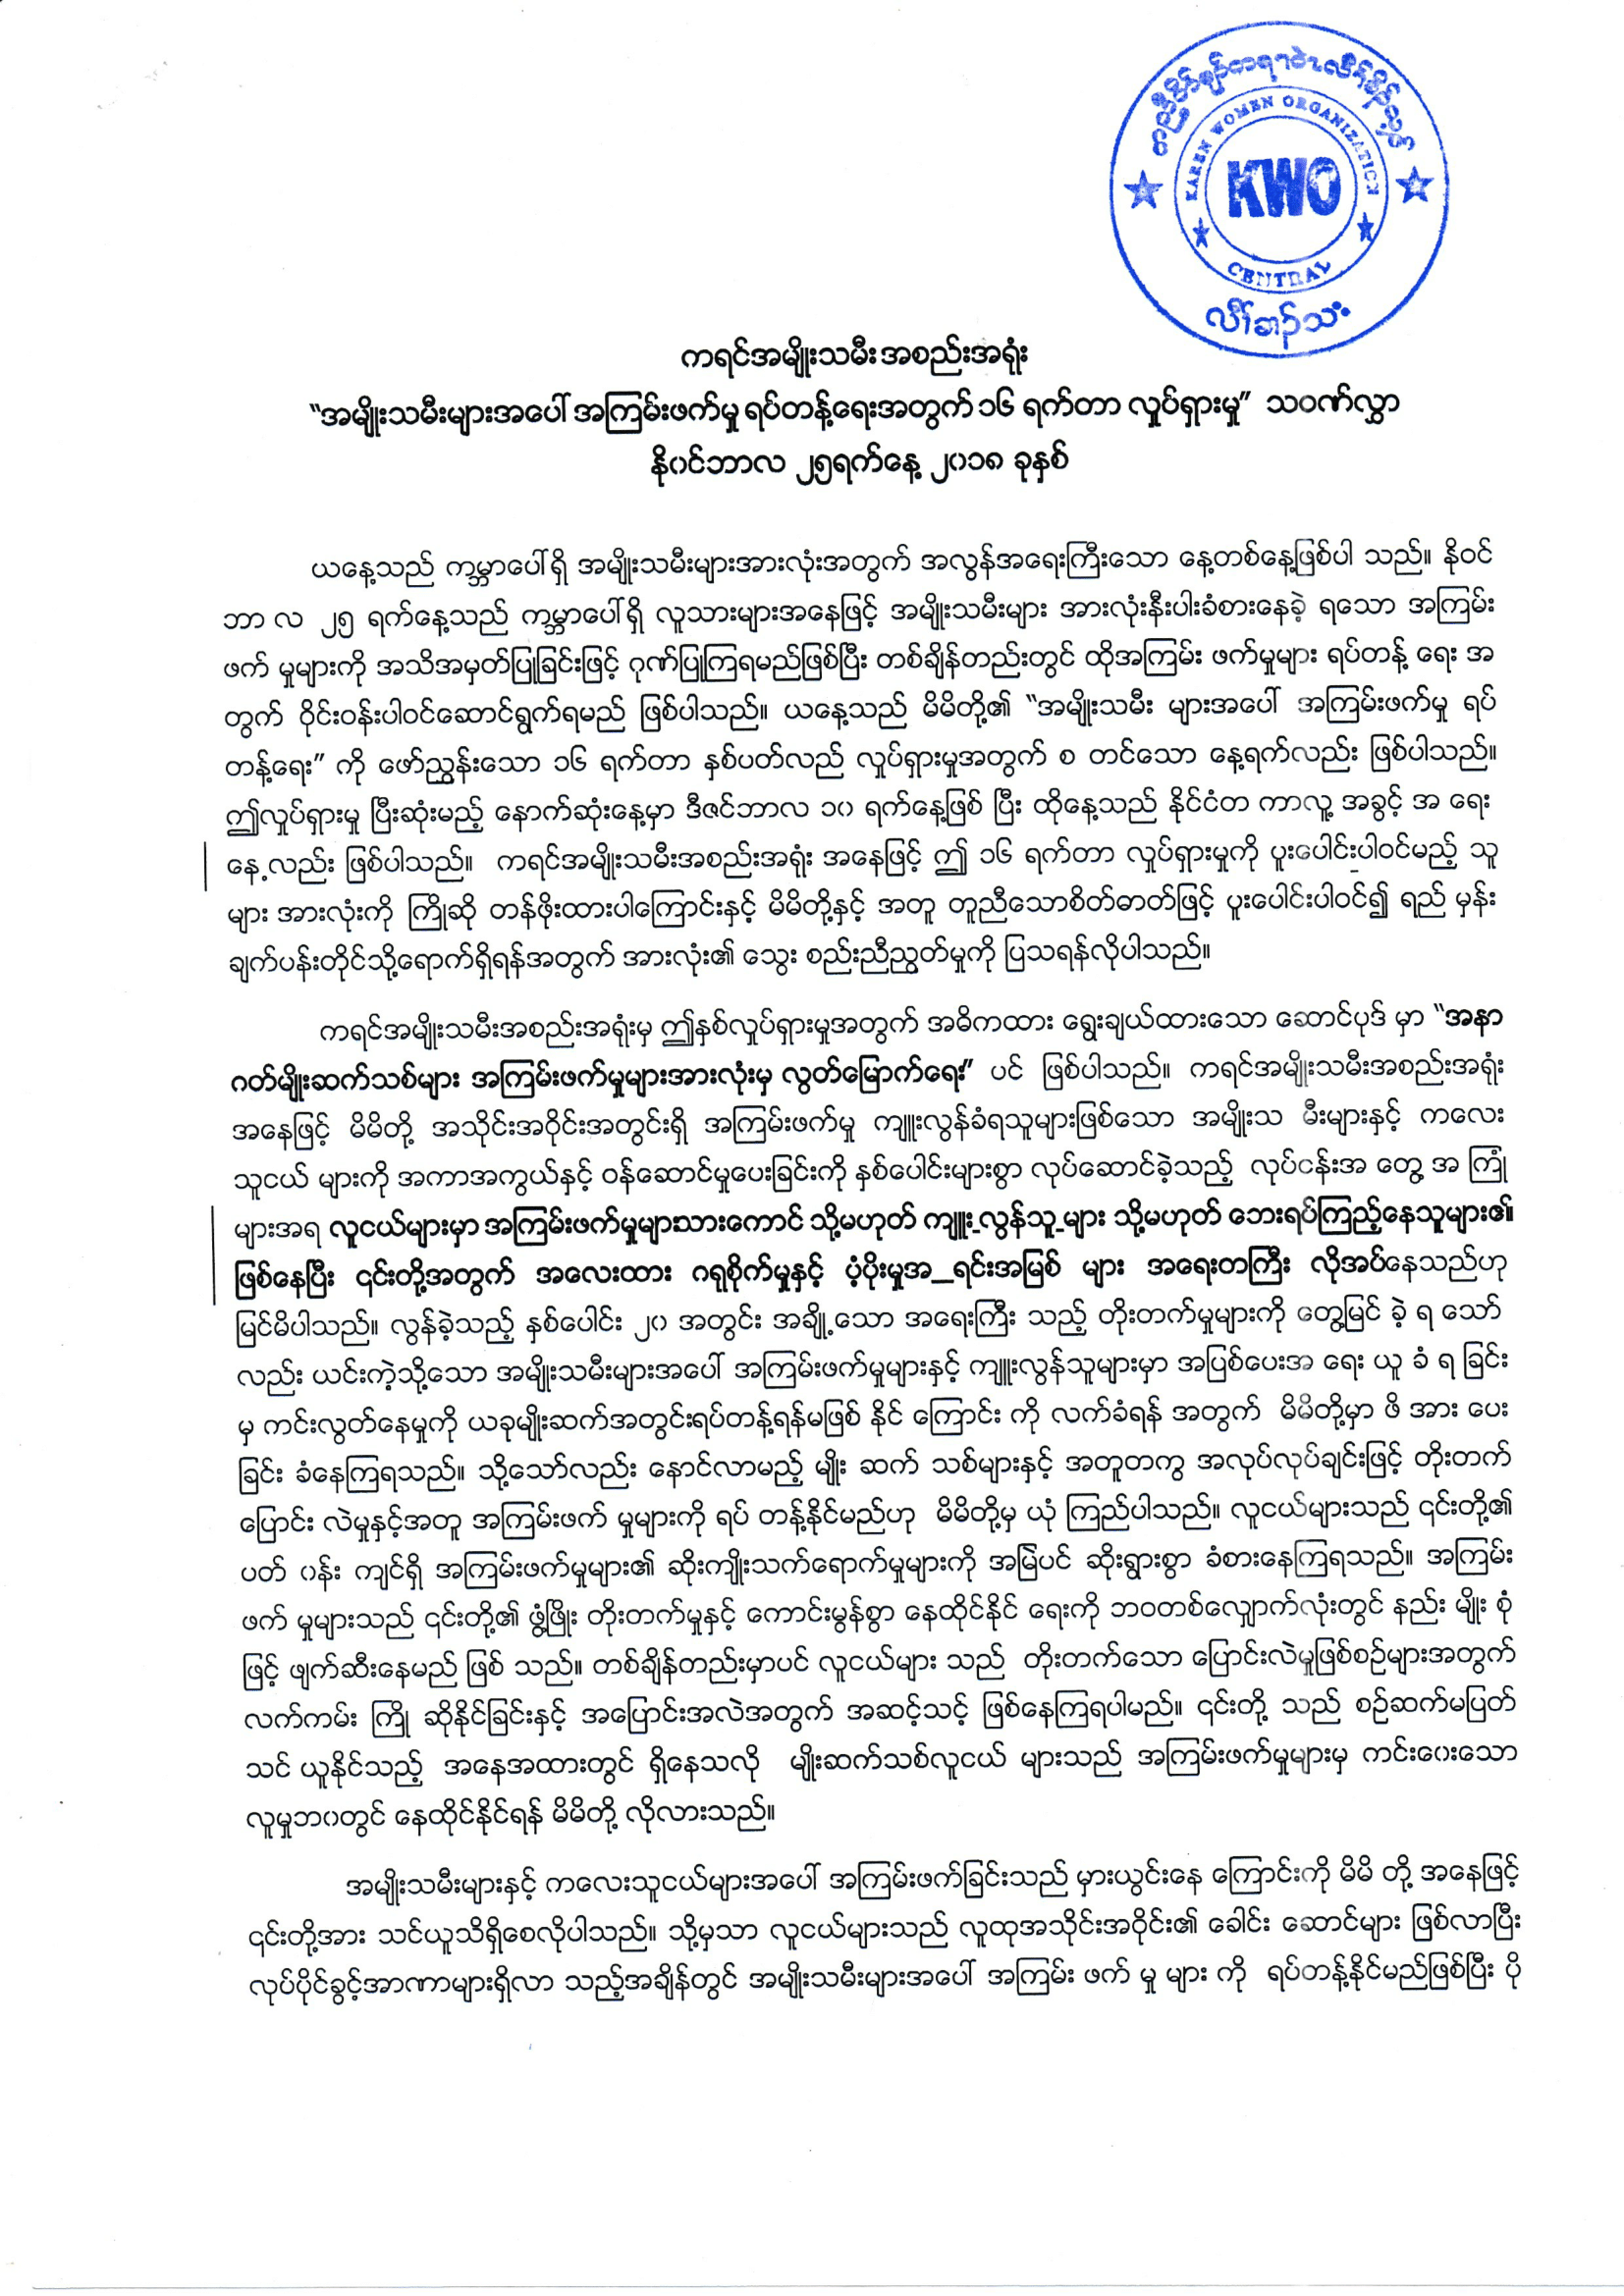 KWO Message Stop Violence Against Women day Burmese Version-1